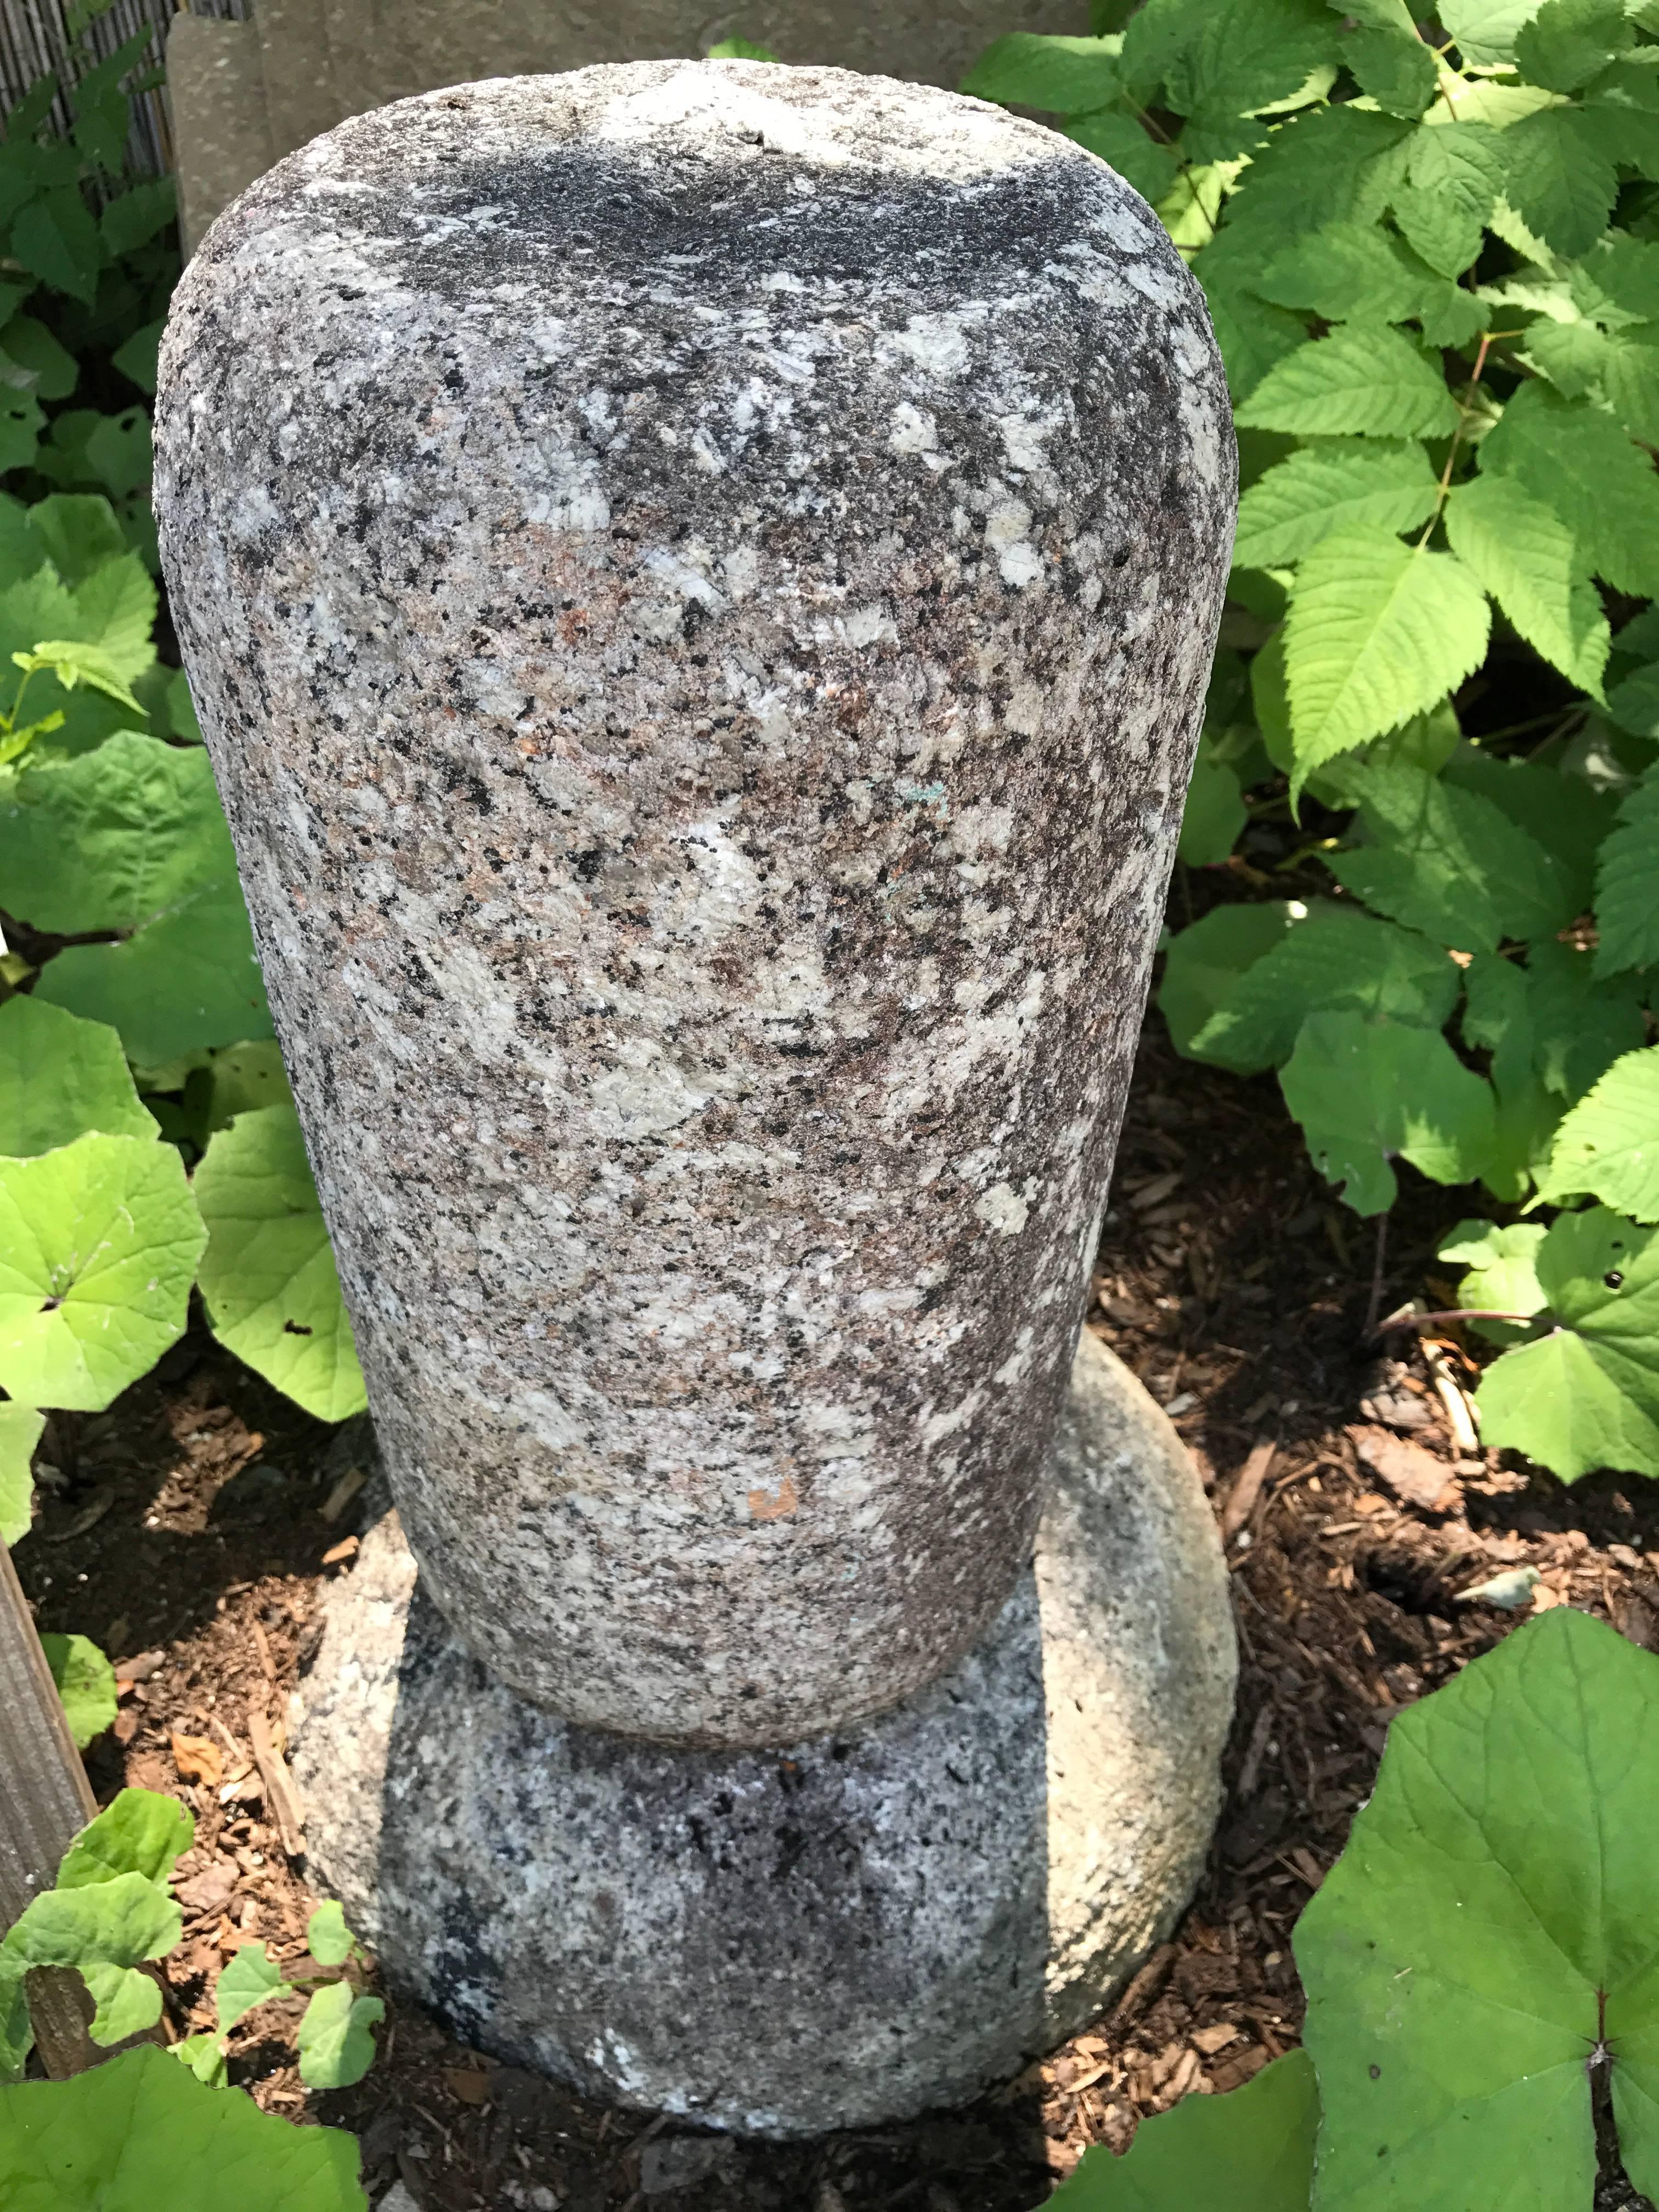 Japanese antique commemorative hand-carved stone marker with a family crest -Mon- dating to the early to mid-Edo period 18th century.

Hand-carved from a high quality solid granite called Mikage-ishi.

Fine old lichen encrusted patina.

Dimensions: